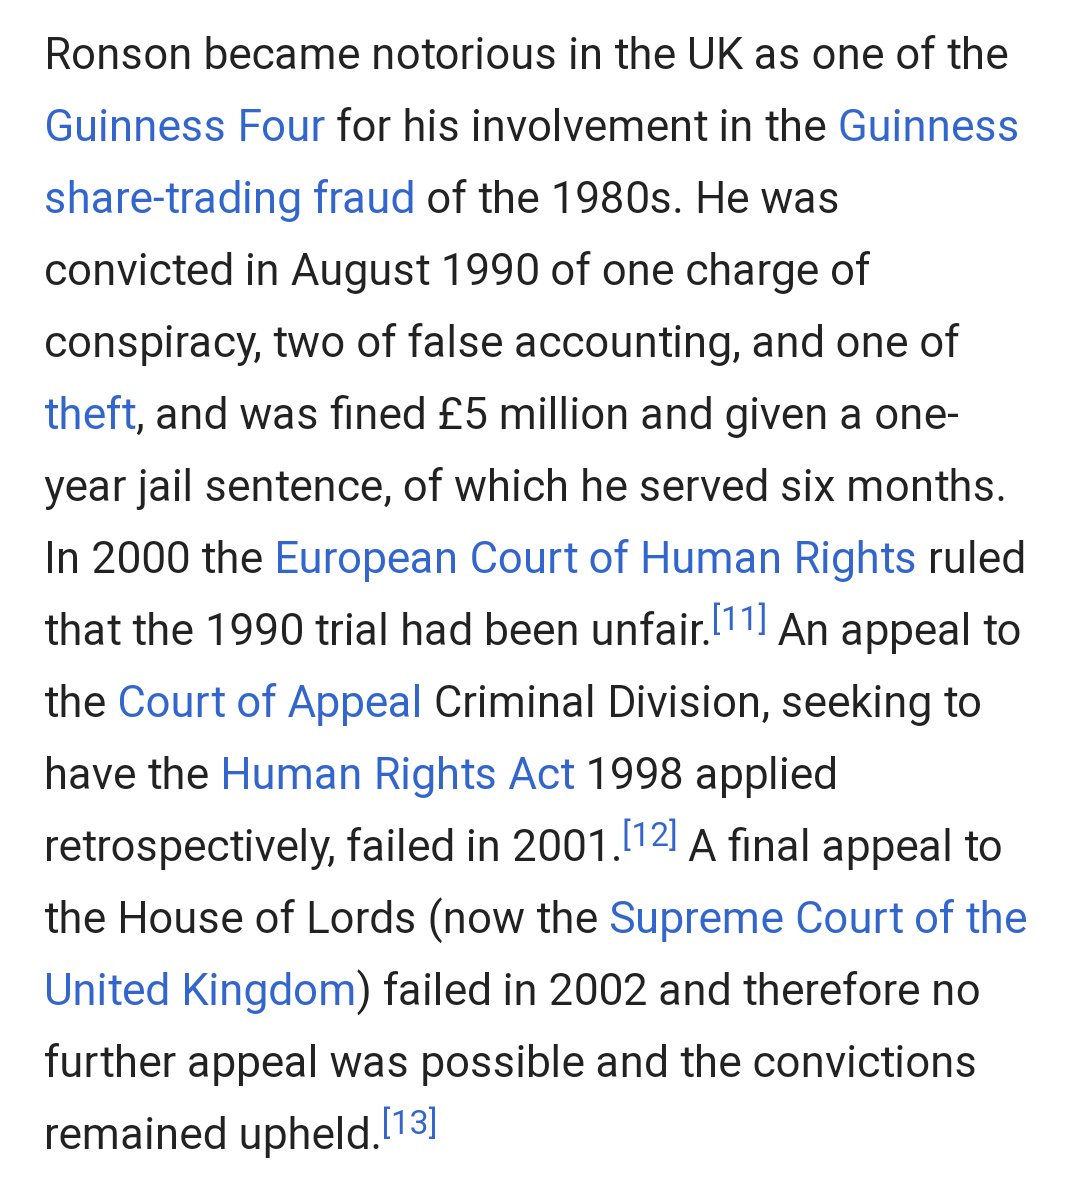 Fraudster Gerald Ronson and his wife Gail had several listings in Epstein's black book, although Gail denies having met him. Gerald - VP of NSPCC and friend of Greville Janner - is related to Leon Brittan of Barnes Common and Malcolm Cash-for-Access Rifkind of Dunblane.